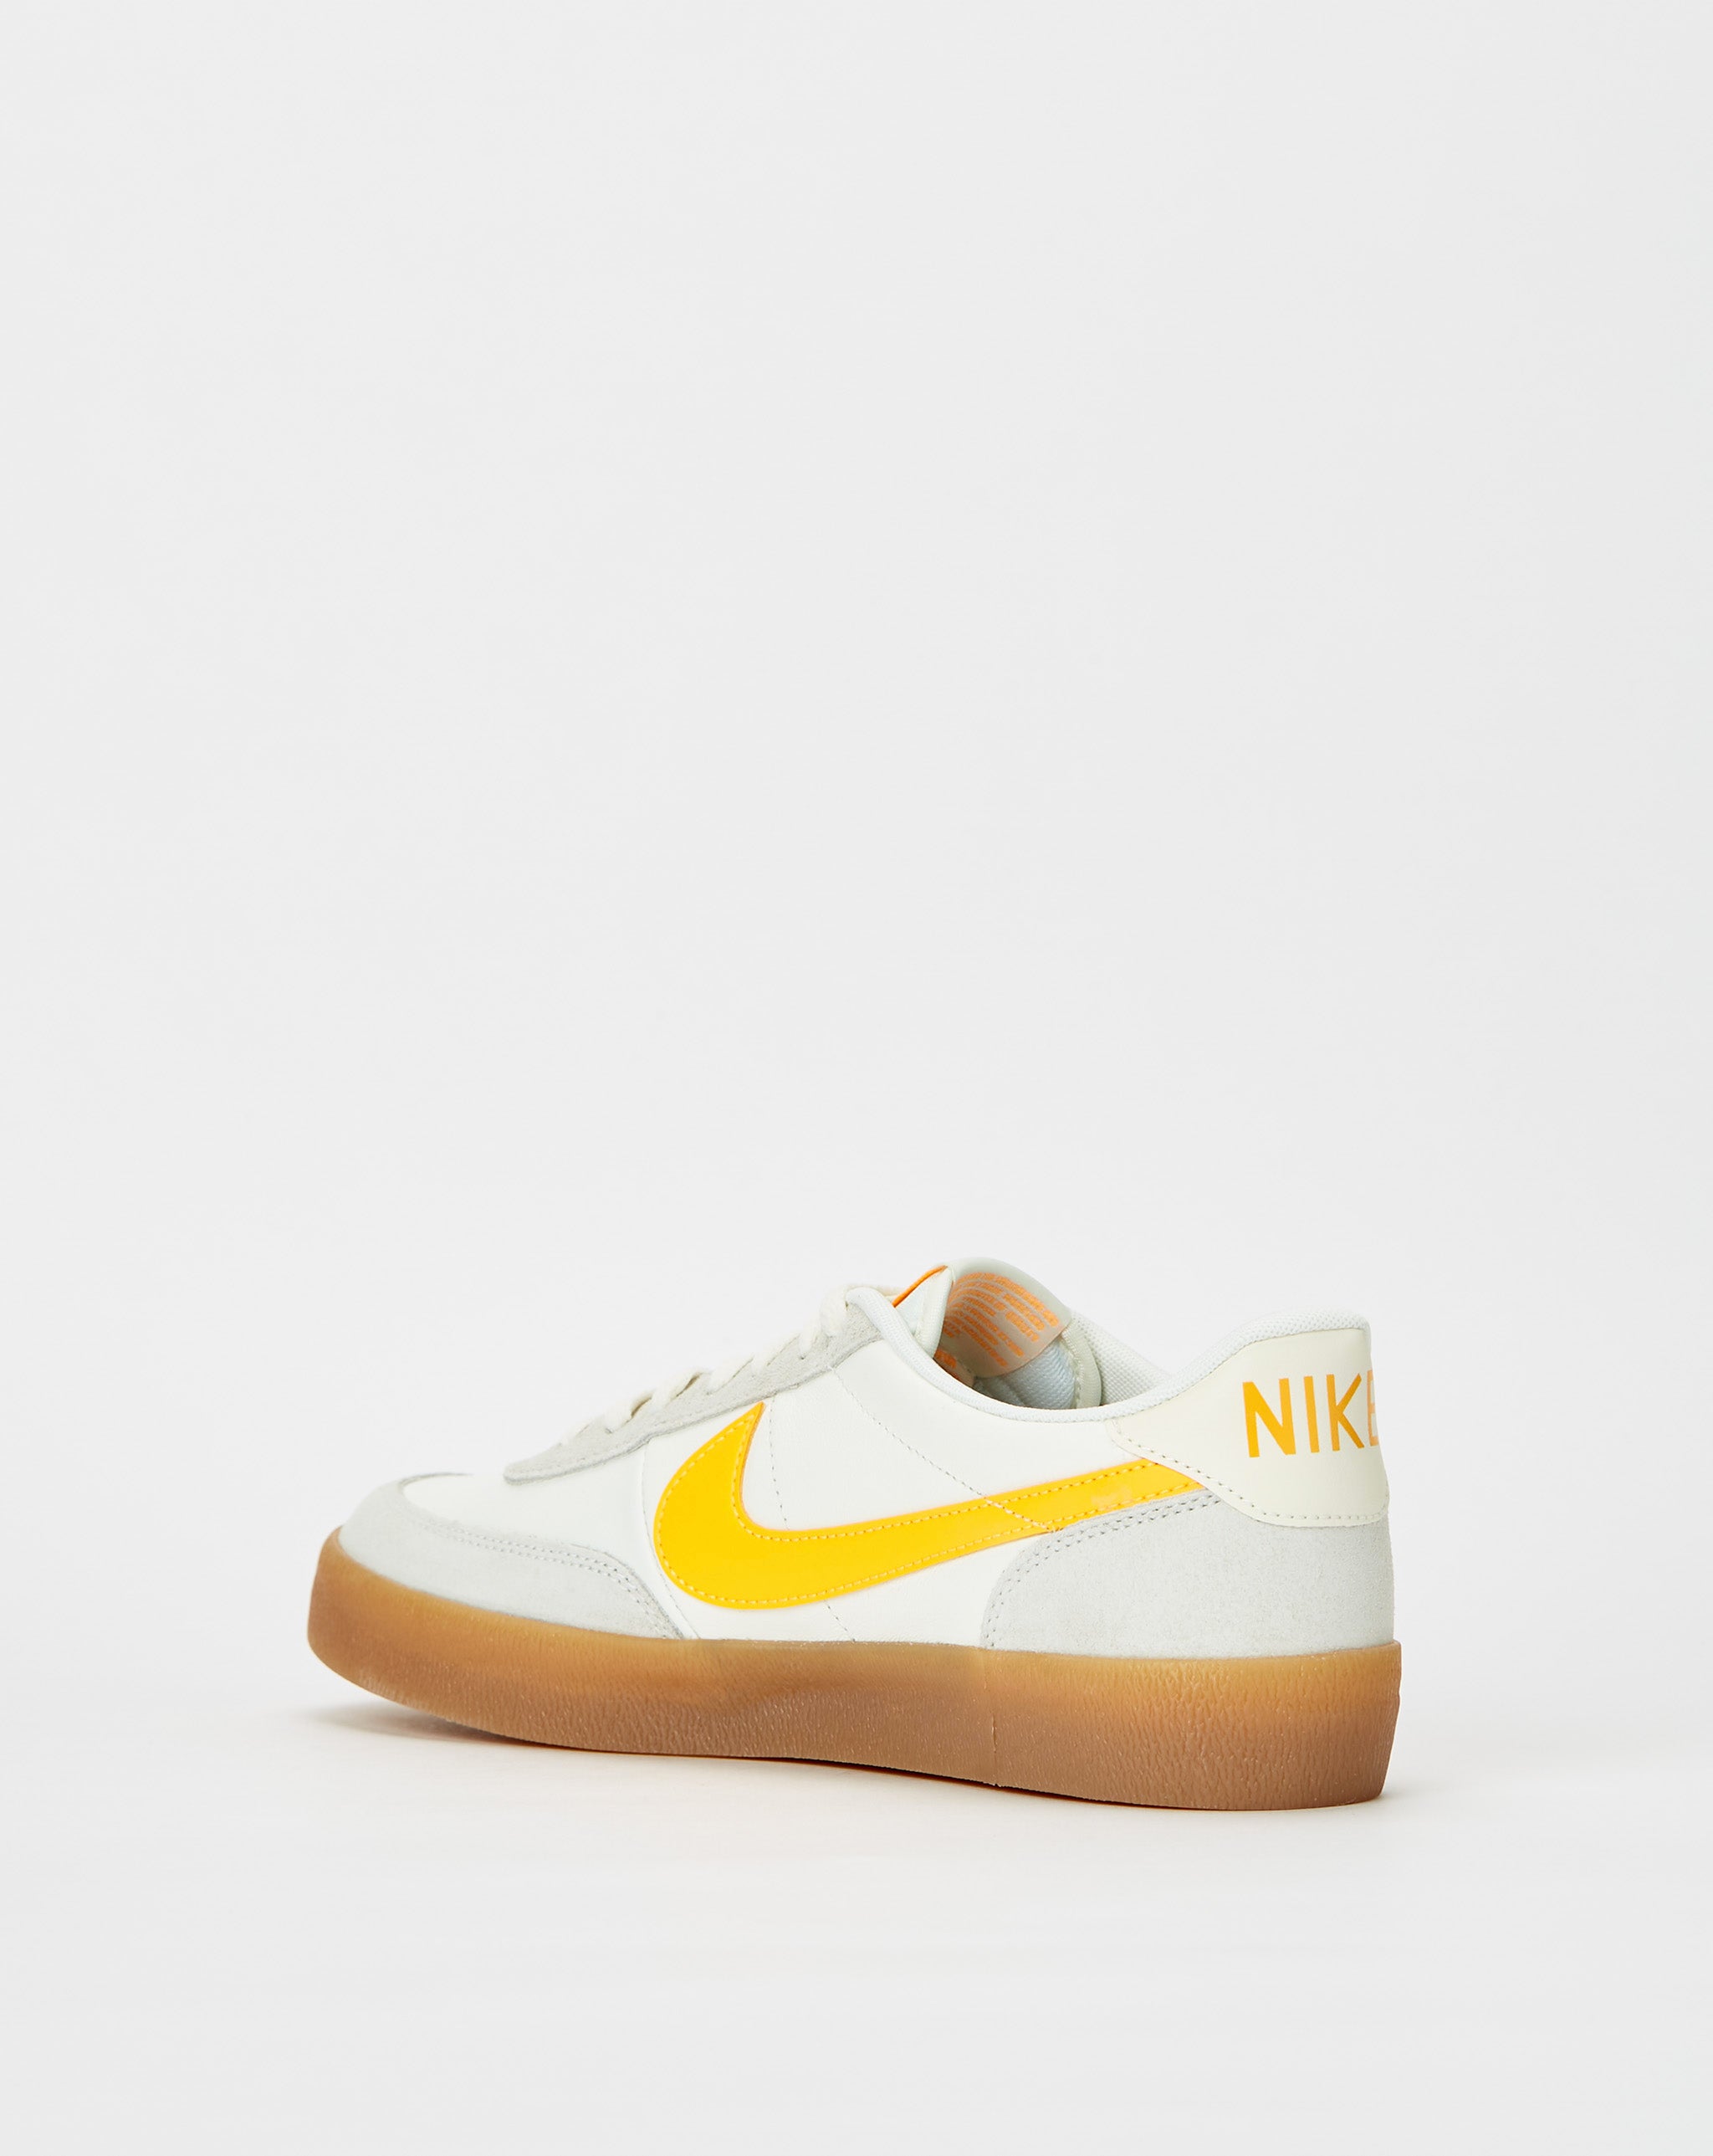 nike sb bored for kids shoes sale cheap